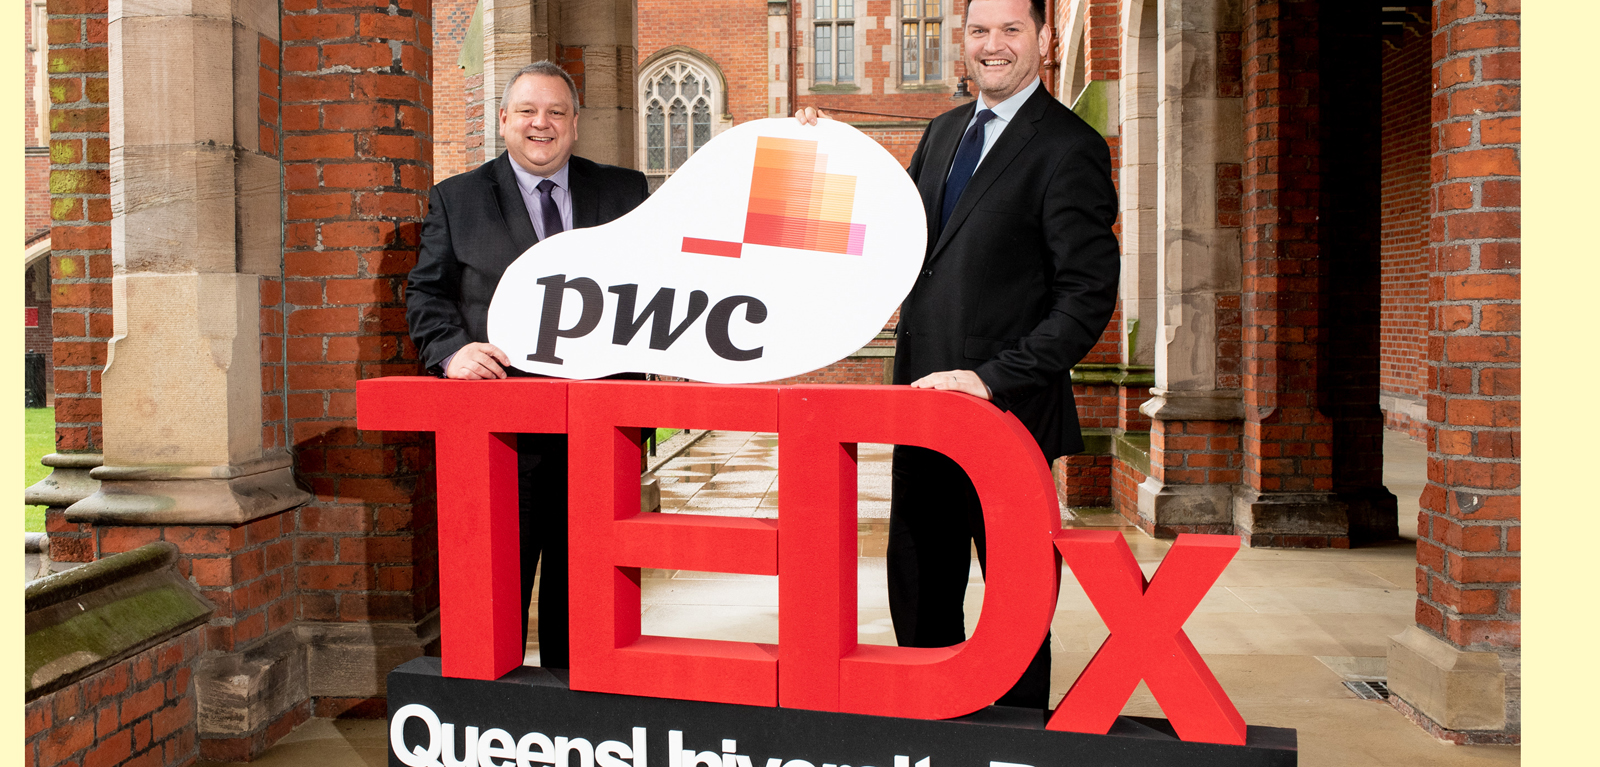 Caption: John Astley (left), Managing Director at PwC's Operate is pictured with Alistair Stewart, Head of Public Engagement, Queen's University Belfast, ahead of the Univeristy's digital TEDx event on 10 June. Entitled ‘Adapt and Change’, the event offers informed opinion pieces and reflections on the changes taking place all around us a result of the global COVID-19 pandemic. 